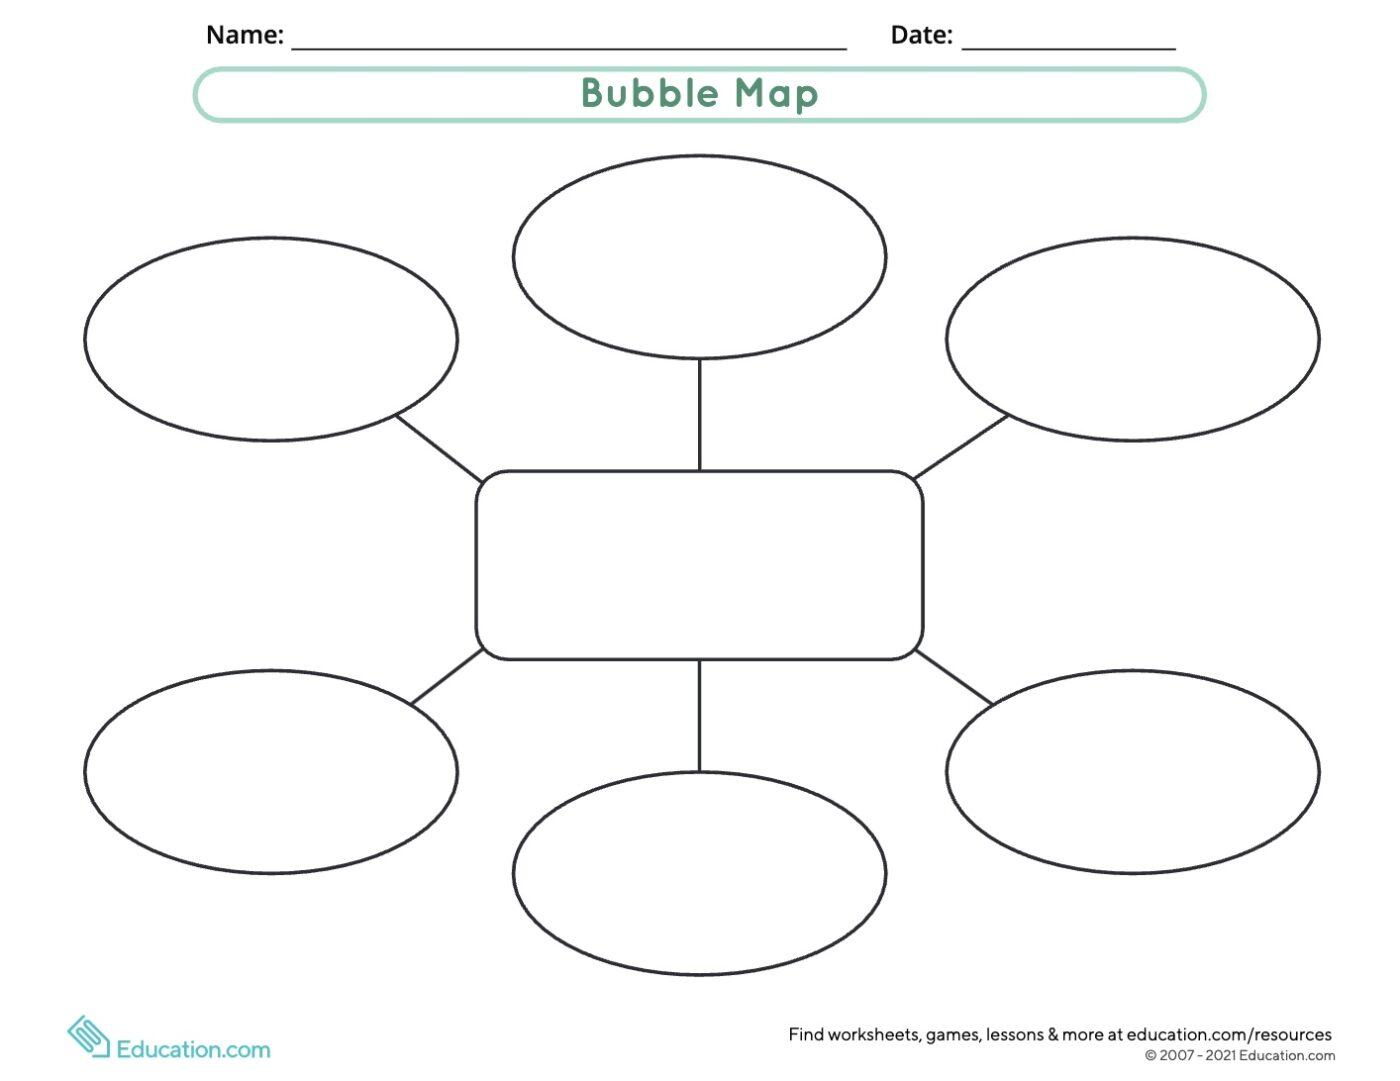 Bubble Map Worksheet Template By Education.com  1400x1081 